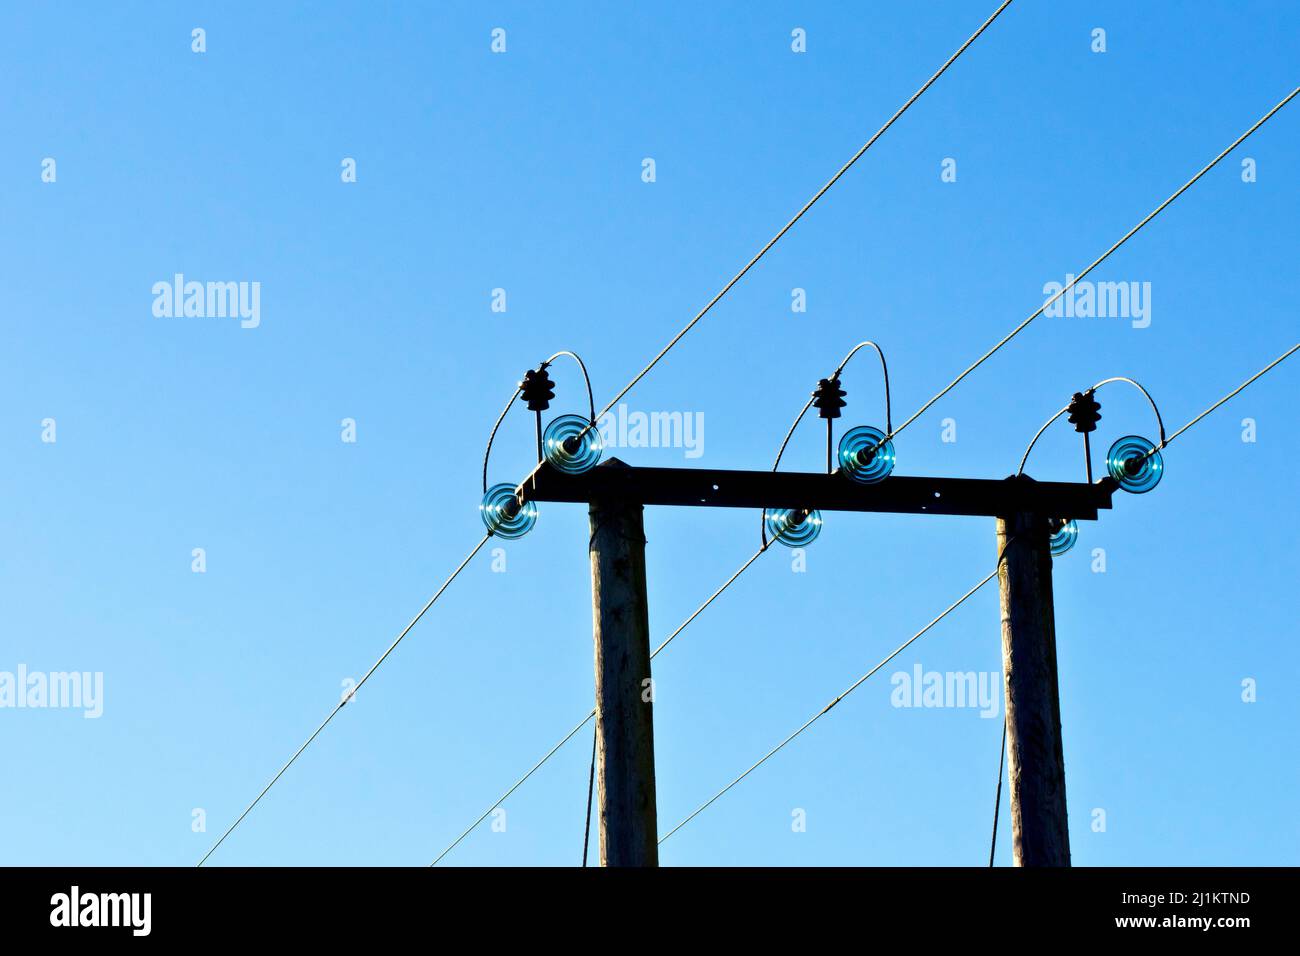 A rural wooden electricity pylon carrying three high voltage power lines across a field, shot back lit against a bright blue sky. Stock Photo